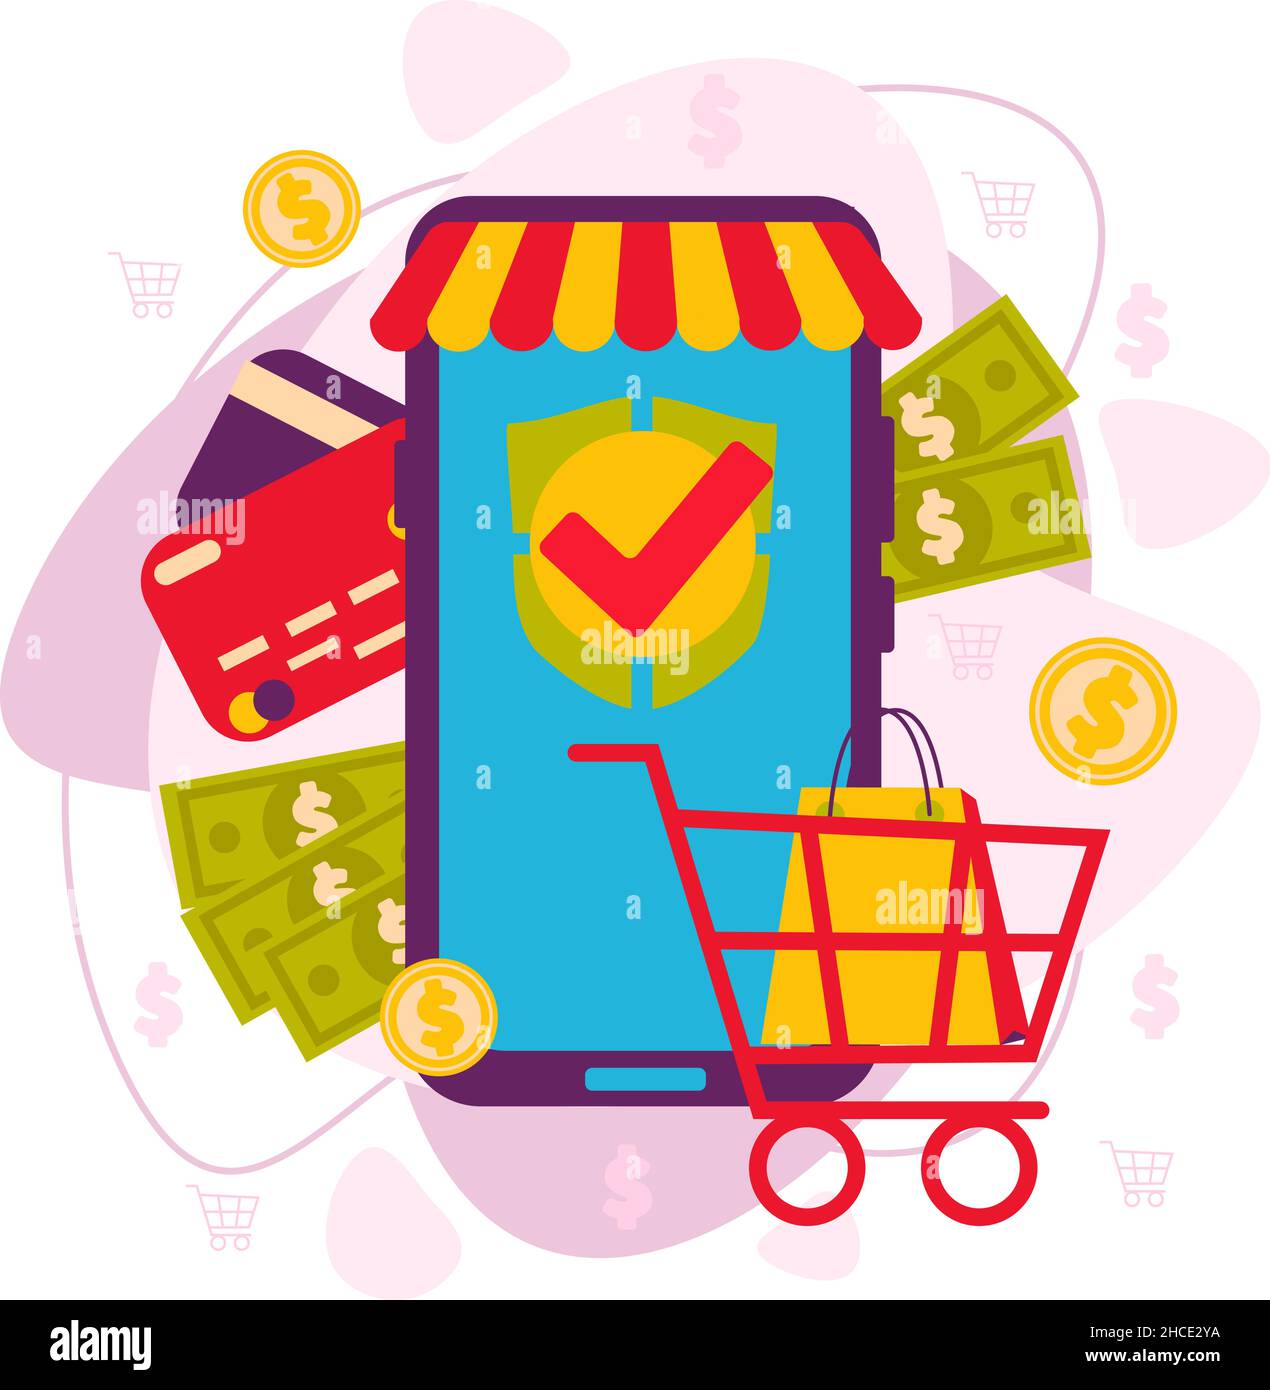 Confirmation of the phone's online payment. Online payments. Stock Vector